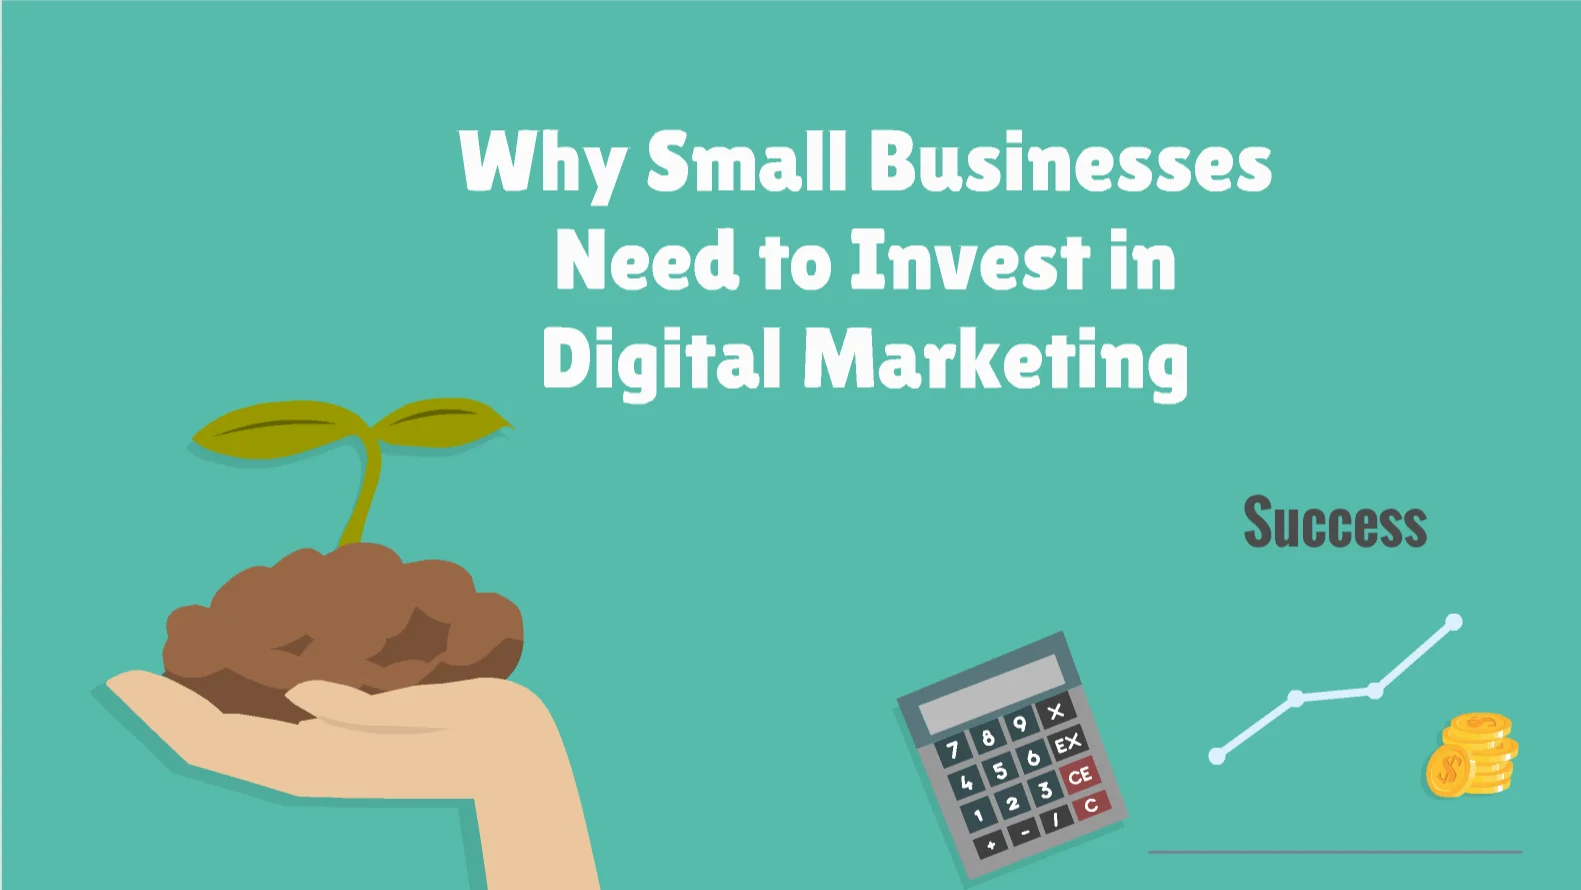 Why Digital Marketing For Small Businesses Is Important